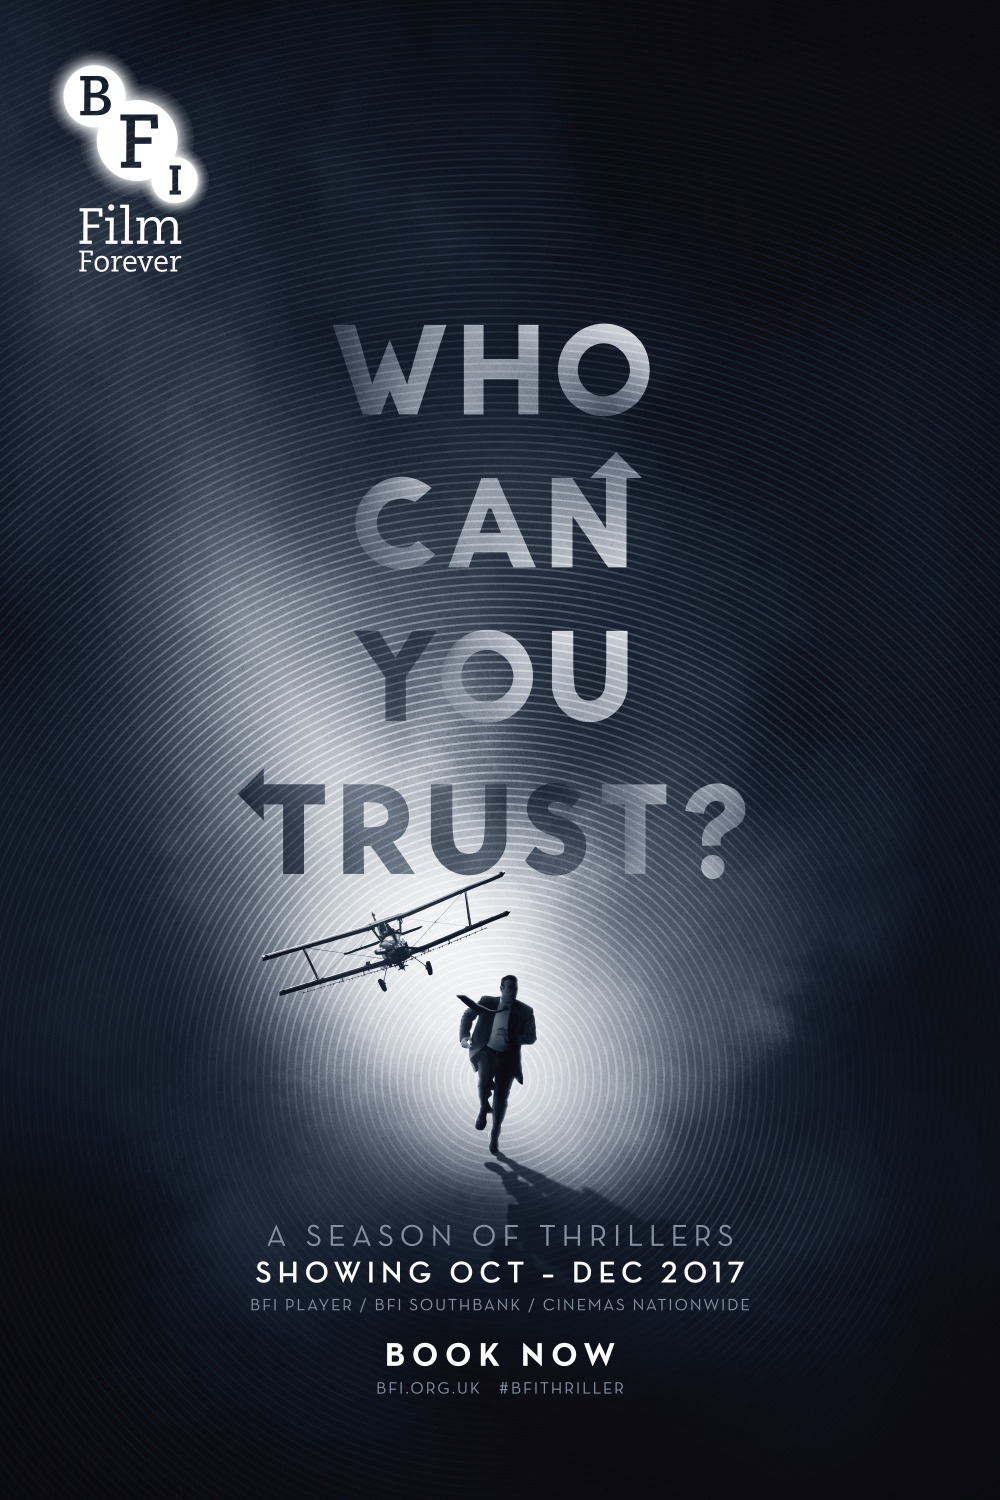 Extra Large TV Poster Image for BFI Film: A Season of Thrillers (#4 of 5)